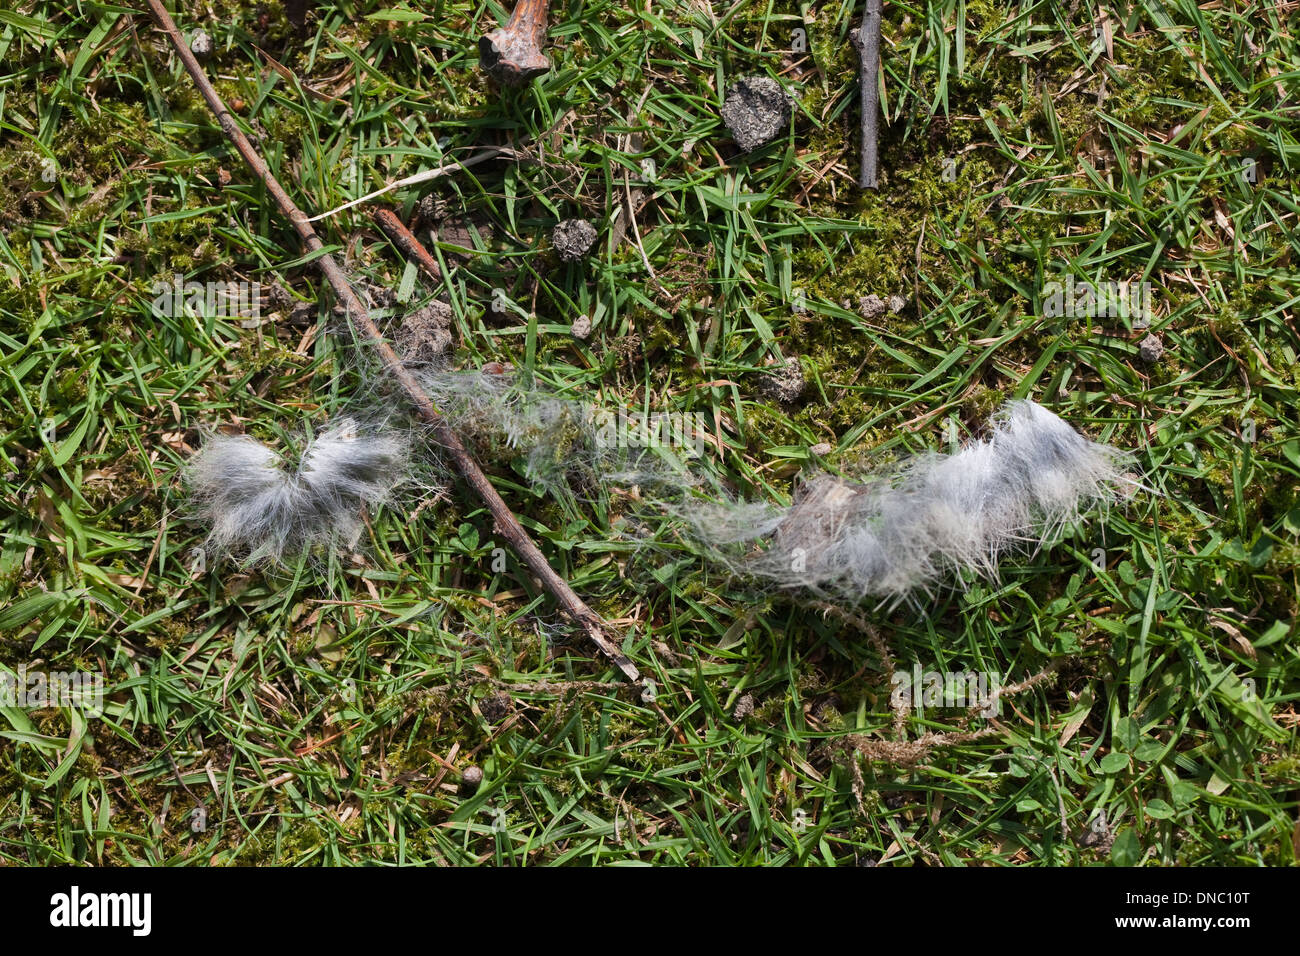 Rabbit fur (Oryctolagus cuniculus). Evidence of a recent scuffle, or fight, where one animal attempted to displace another. Stock Photo